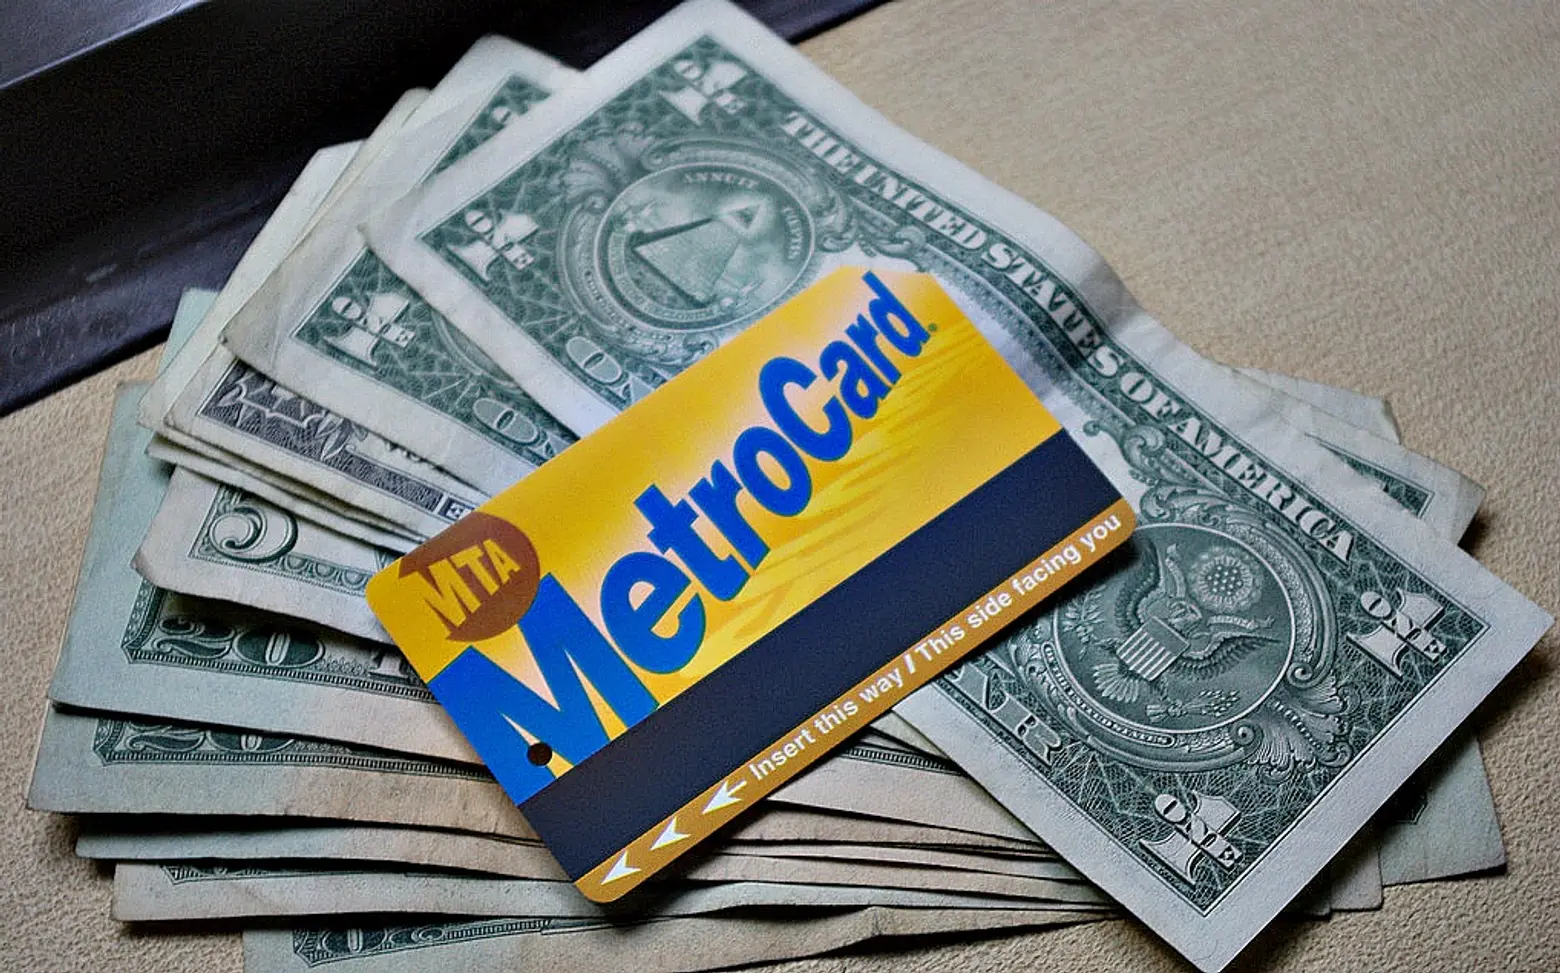 Despite declining service, MTA will most likely raise fares in 2019